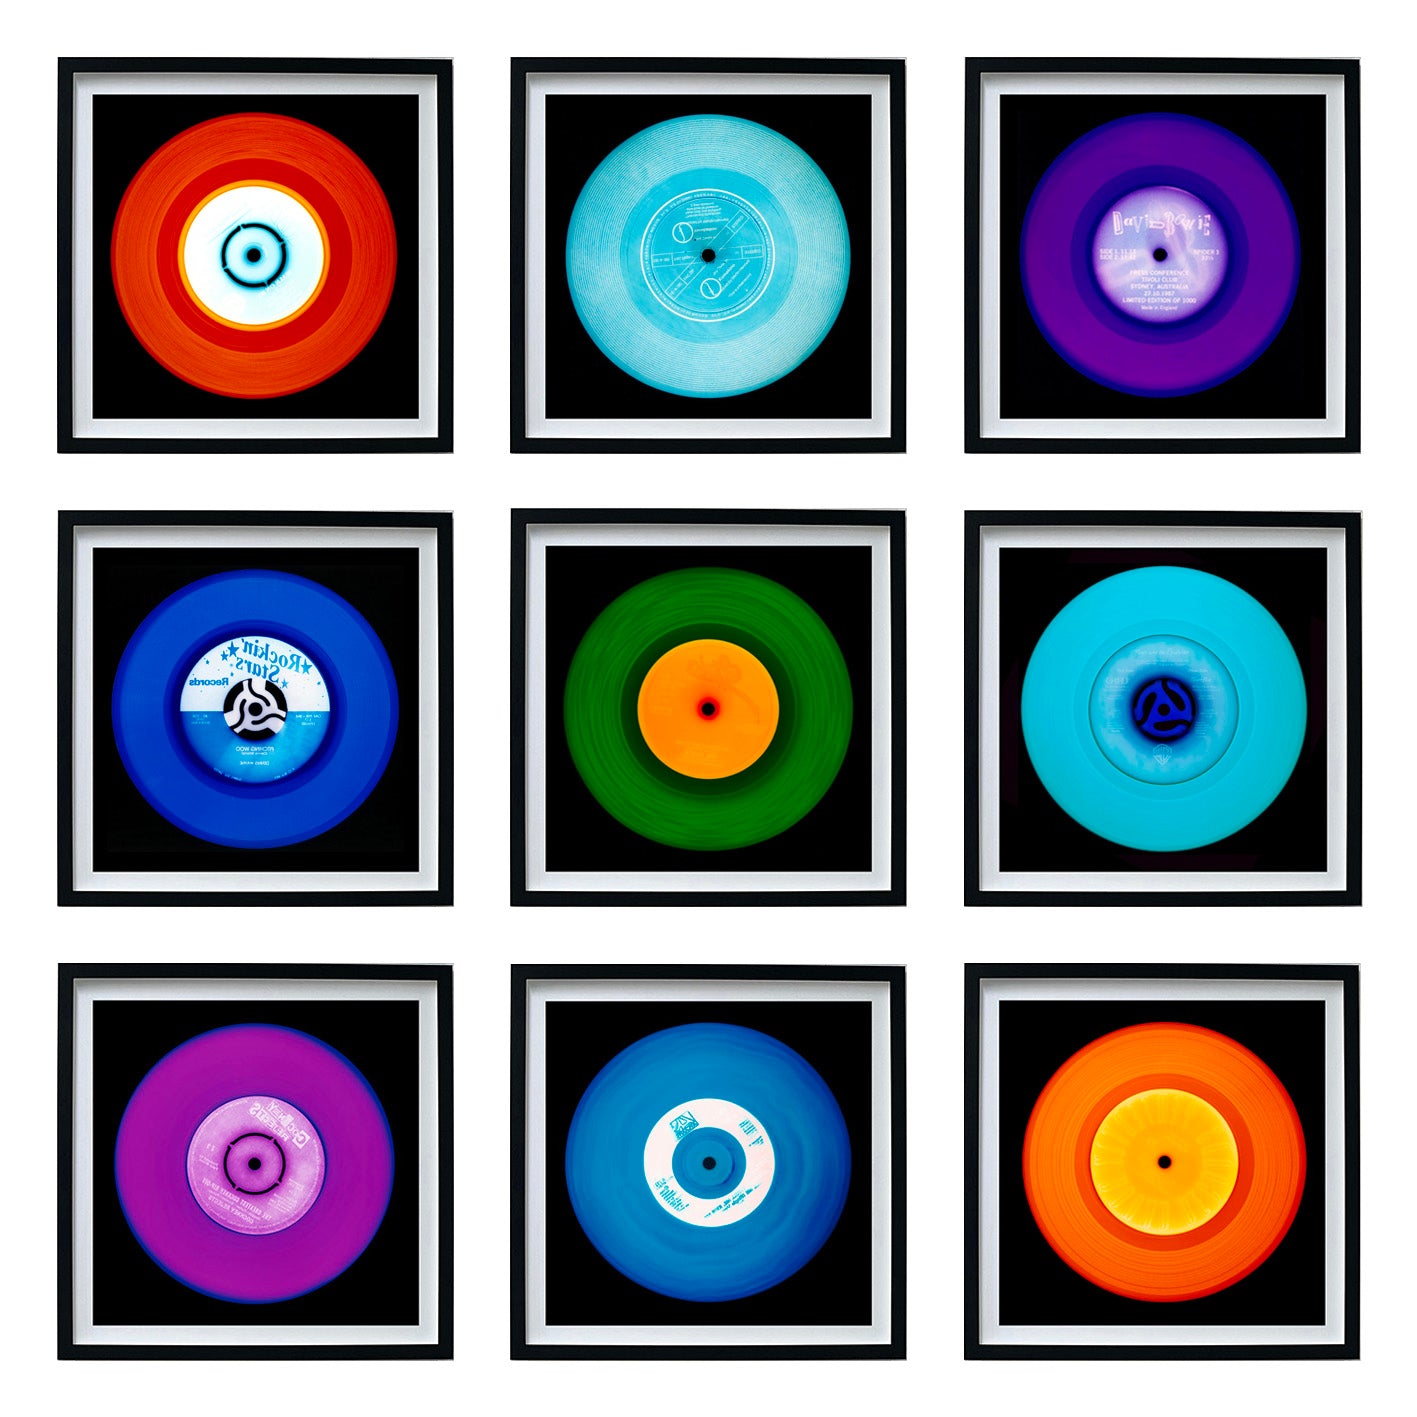 Photographs by Natasha Heidler and Richard Heeps.  A set of 9 vinyls records in a variety of colours in a 3 x 3 configuration.